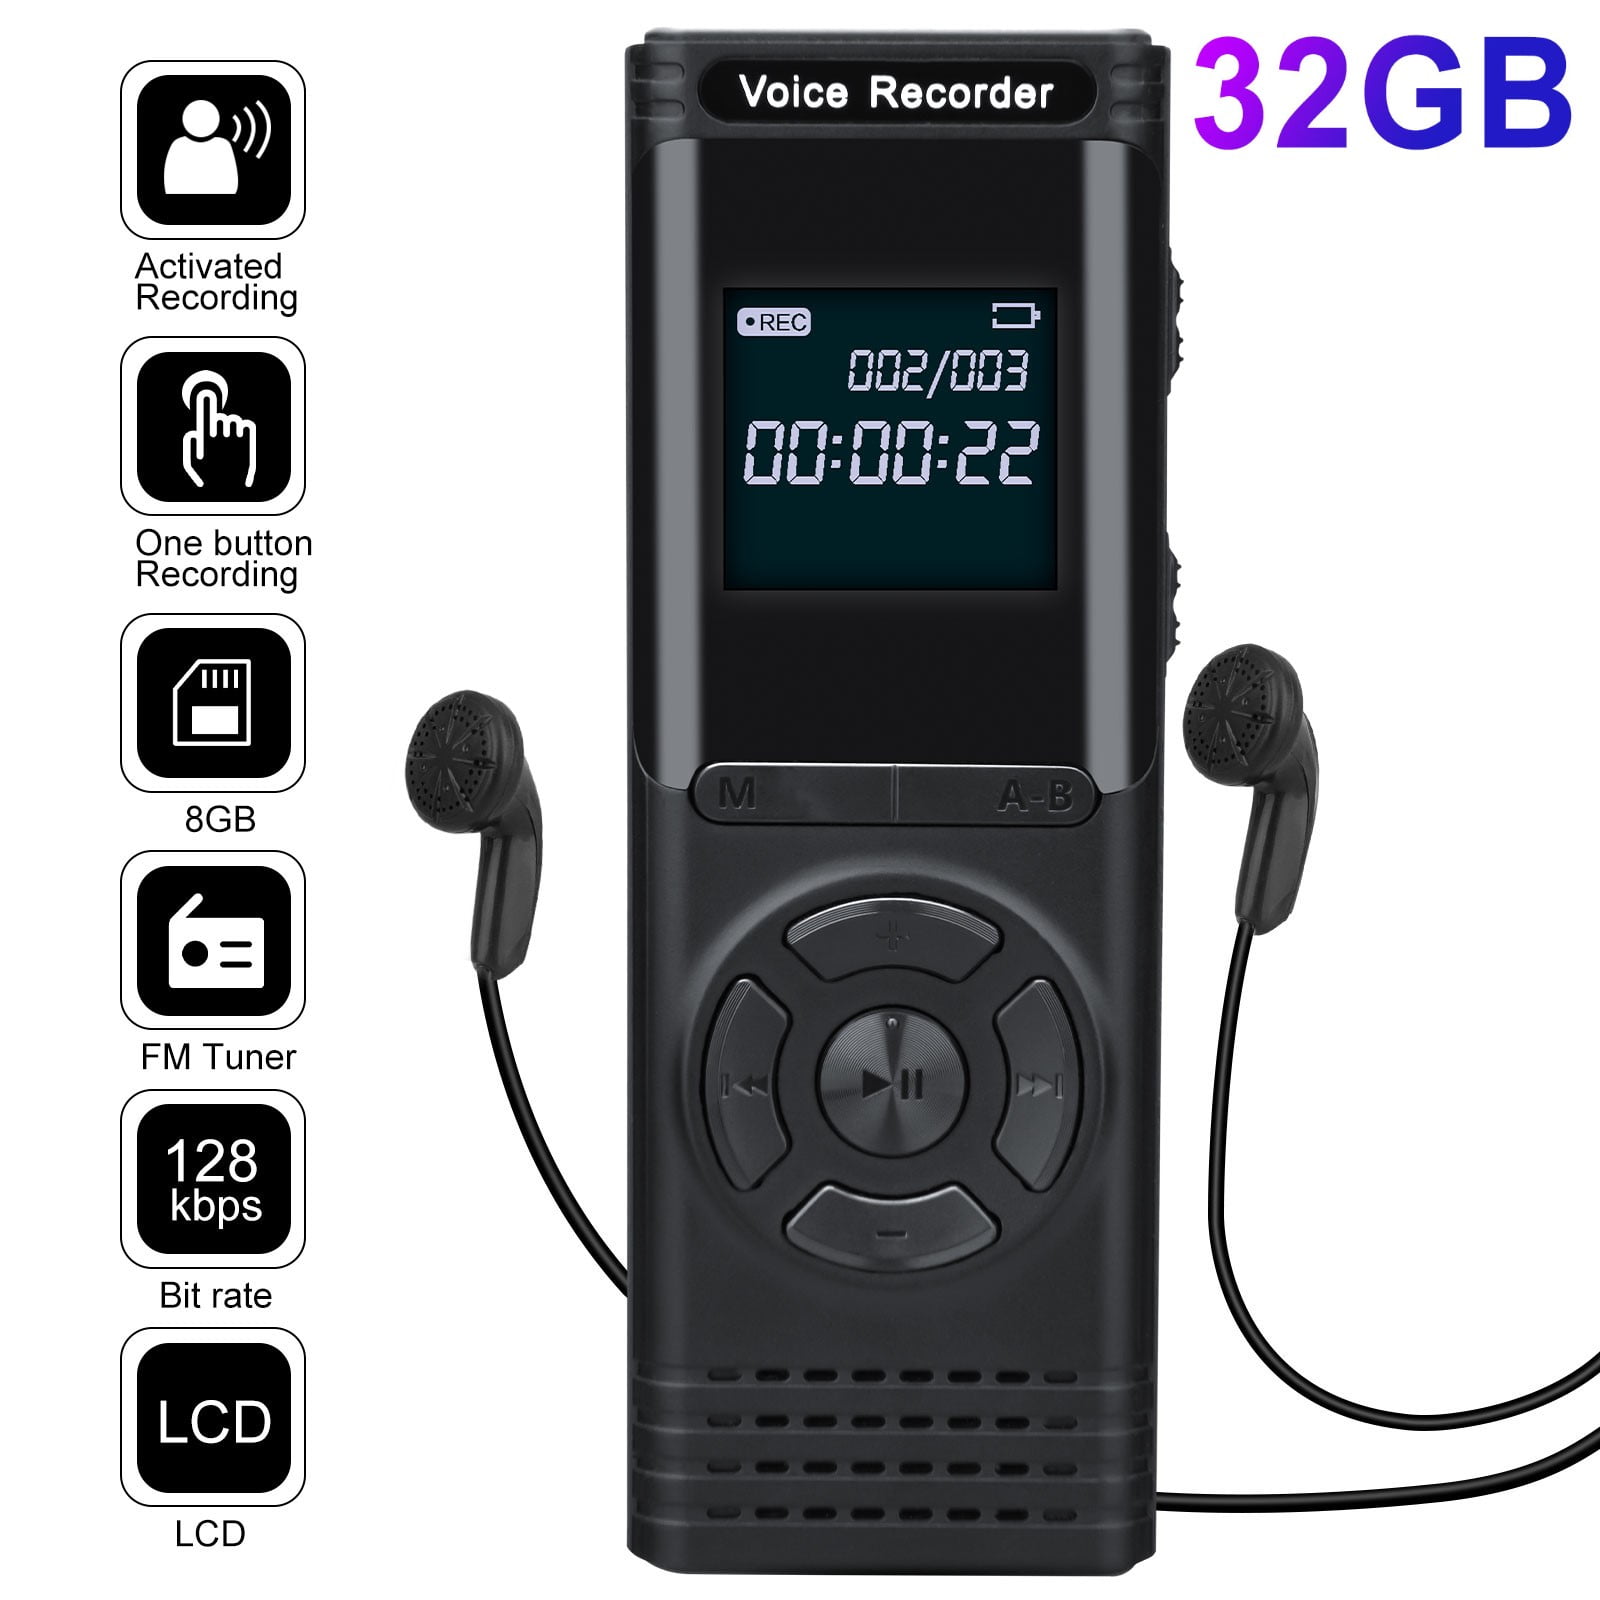 PESGONE 16GB Digital Voice Recorder dictaphones for Lectures Sound Audio Recorder Dictaphone Tape Recorder Recording Device with Playback Perfect for Meetings Classes Interviews